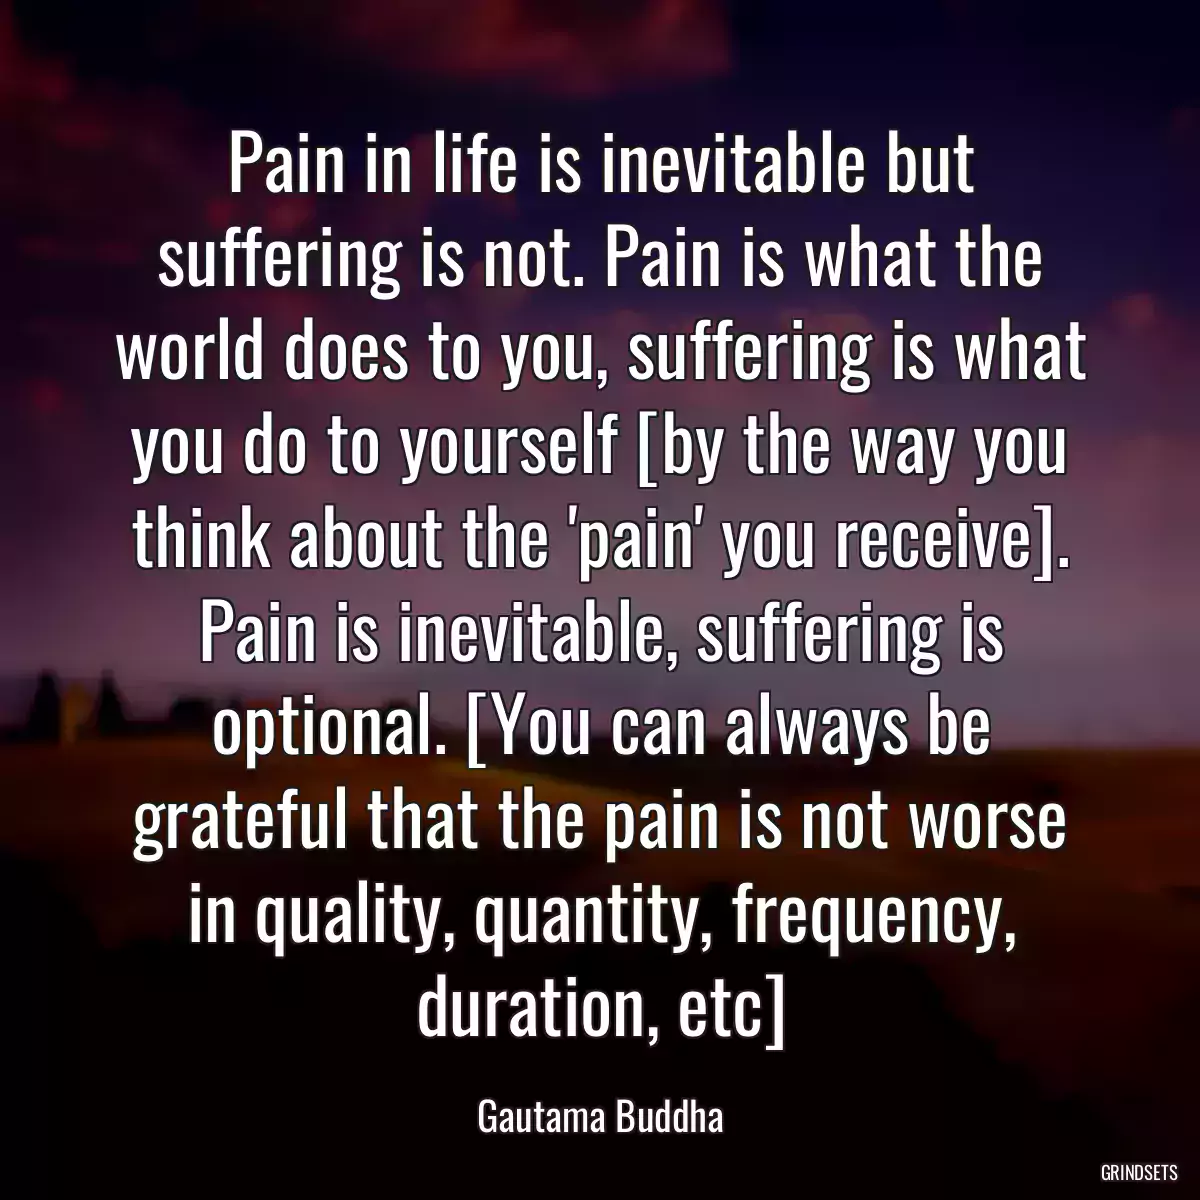 Pain in life is inevitable but suffering is not. Pain is what the world does to you, suffering is what you do to yourself [by the way you think about the \'pain\' you receive]. Pain is inevitable, suffering is optional. [You can always be grateful that the pain is not worse in quality, quantity, frequency, duration, etc]